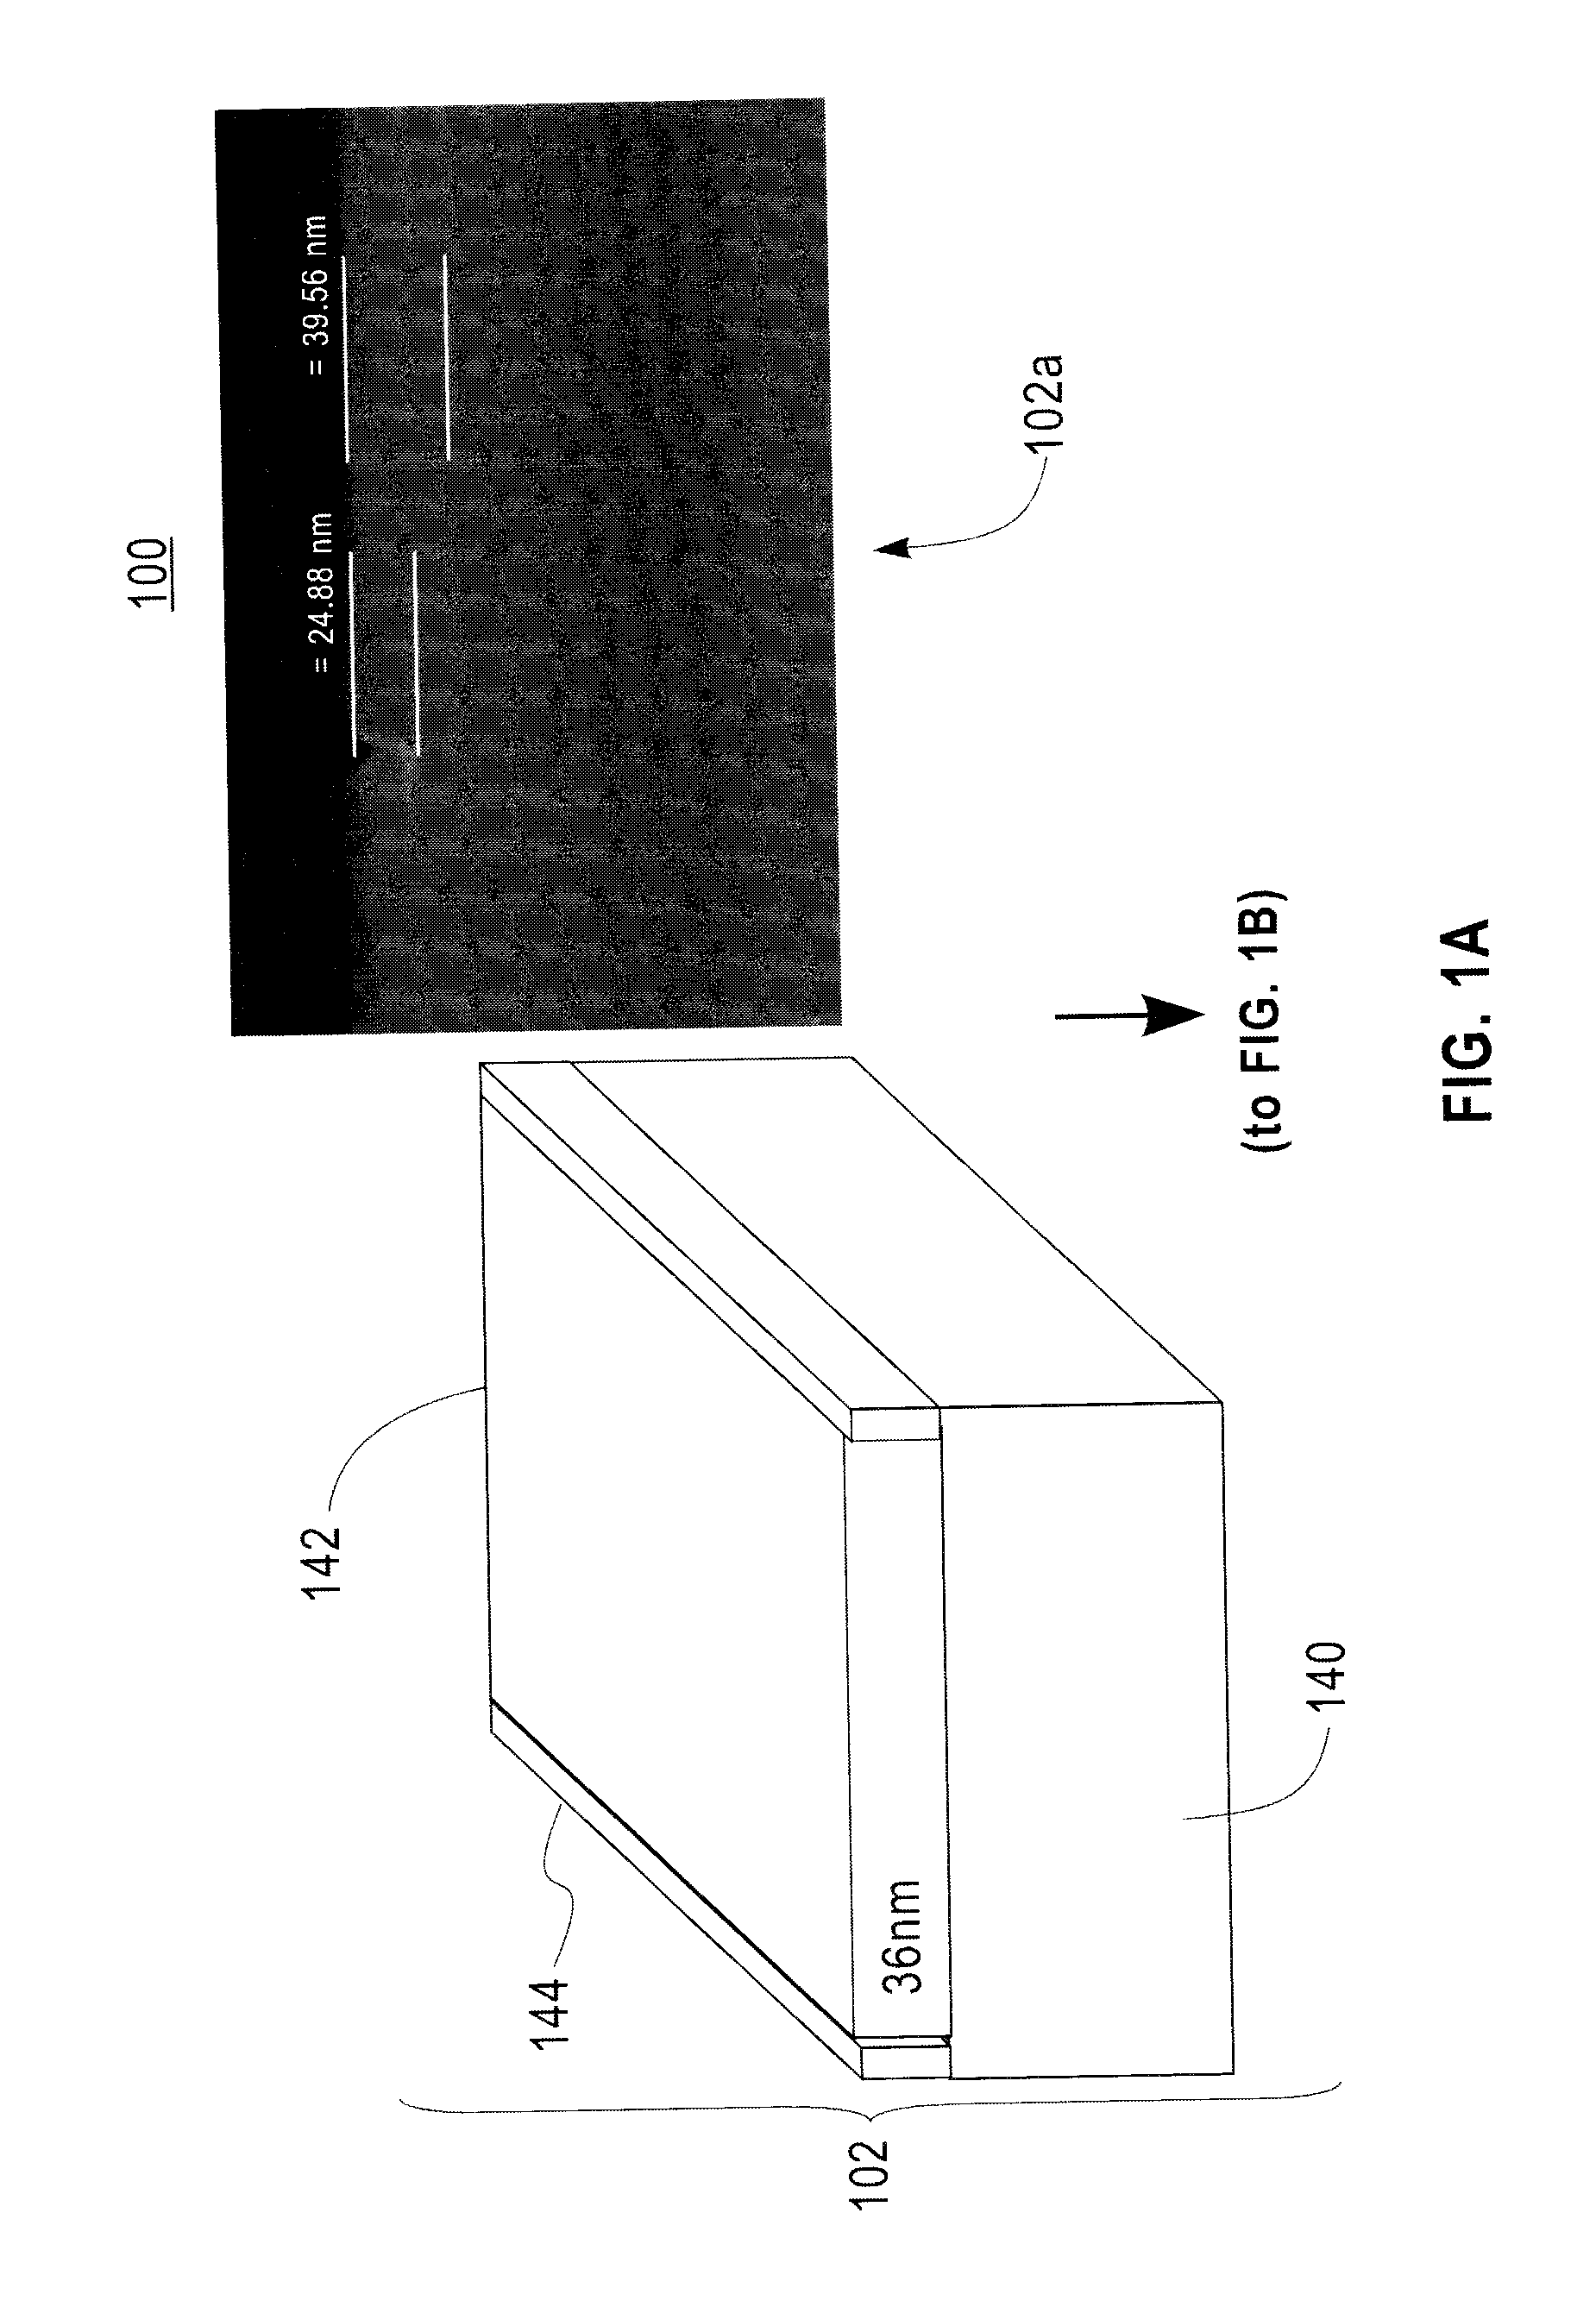 Fin Field Effect Transistor Devices with Self-Aligned Source and Drain Regions